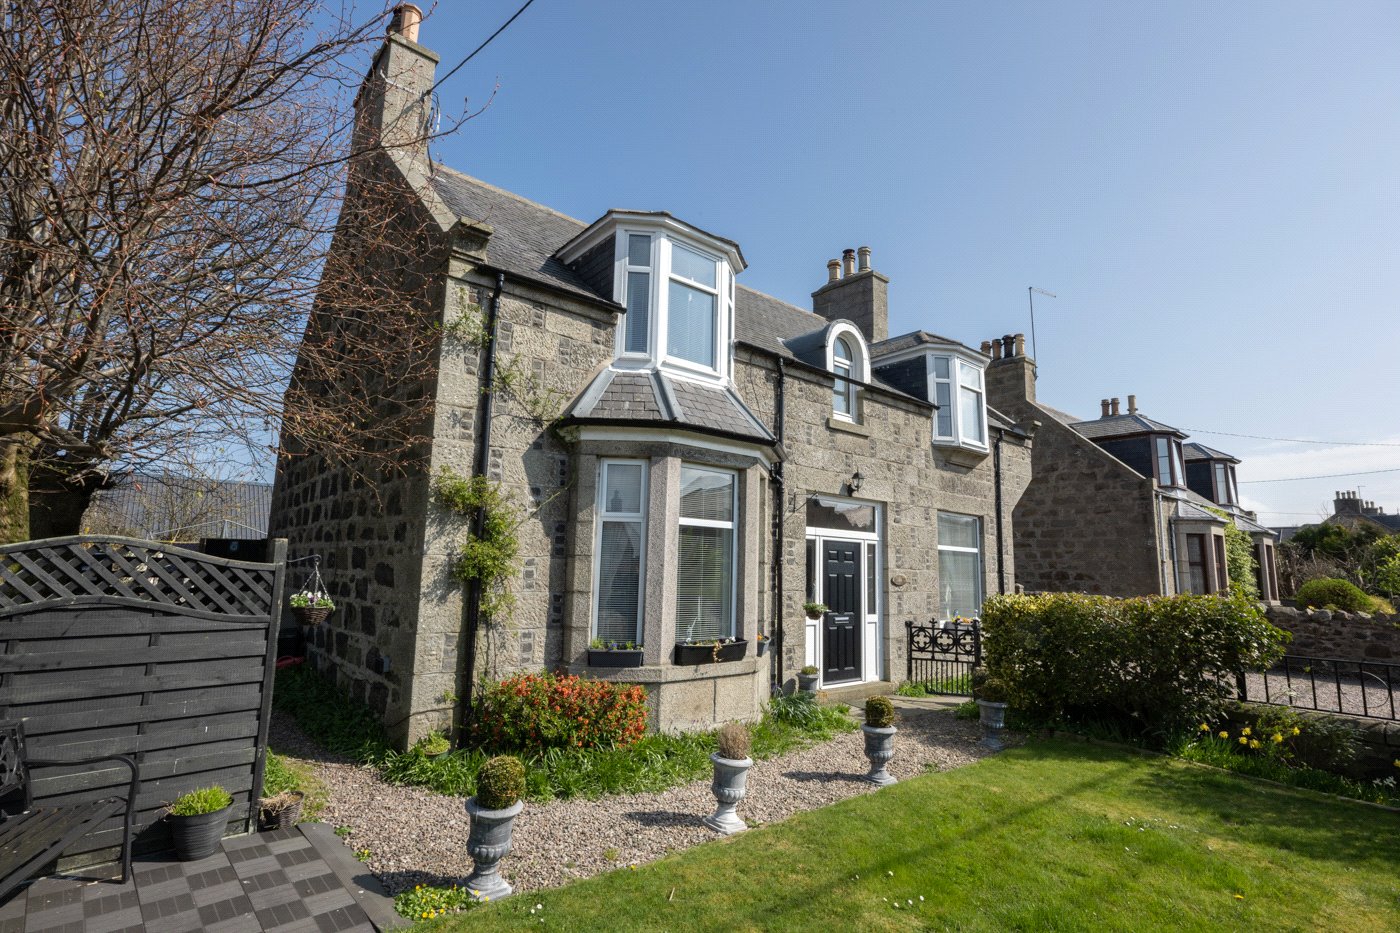 Our latest properties for sale or to let (9th May 2022)